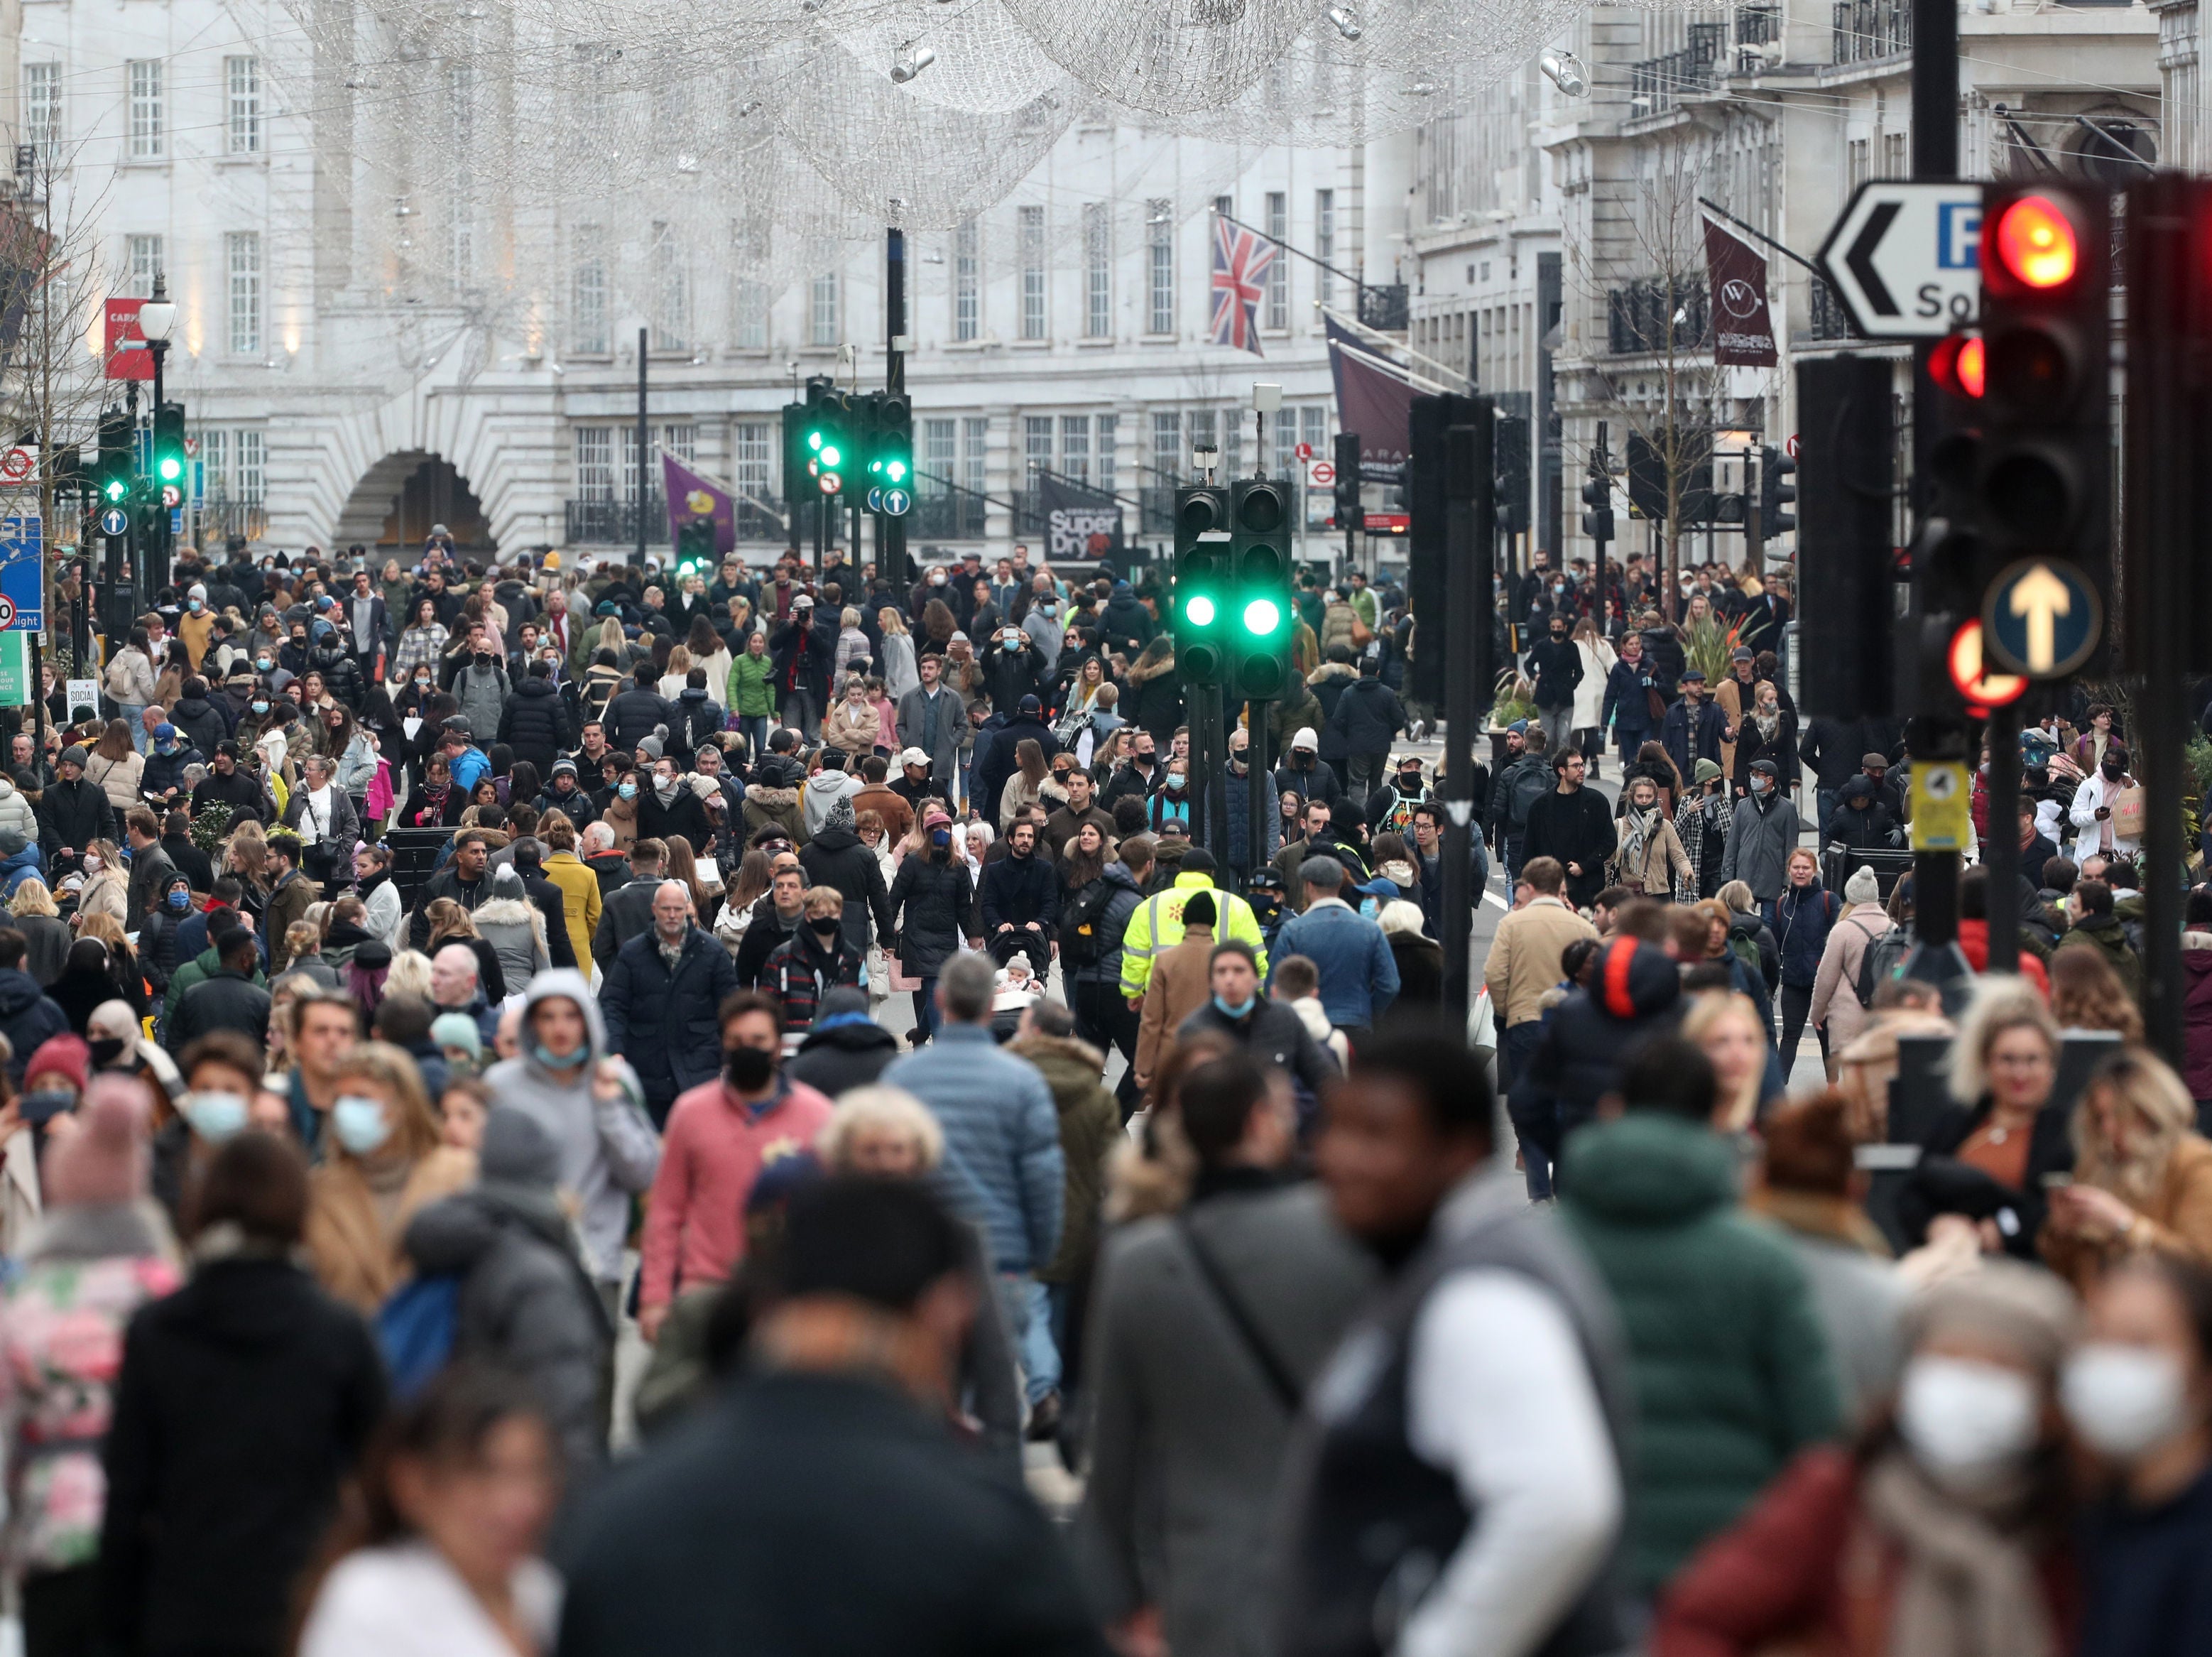 Shoppers on Regent Street in London on the first weekend after England’s second national lockdown ending